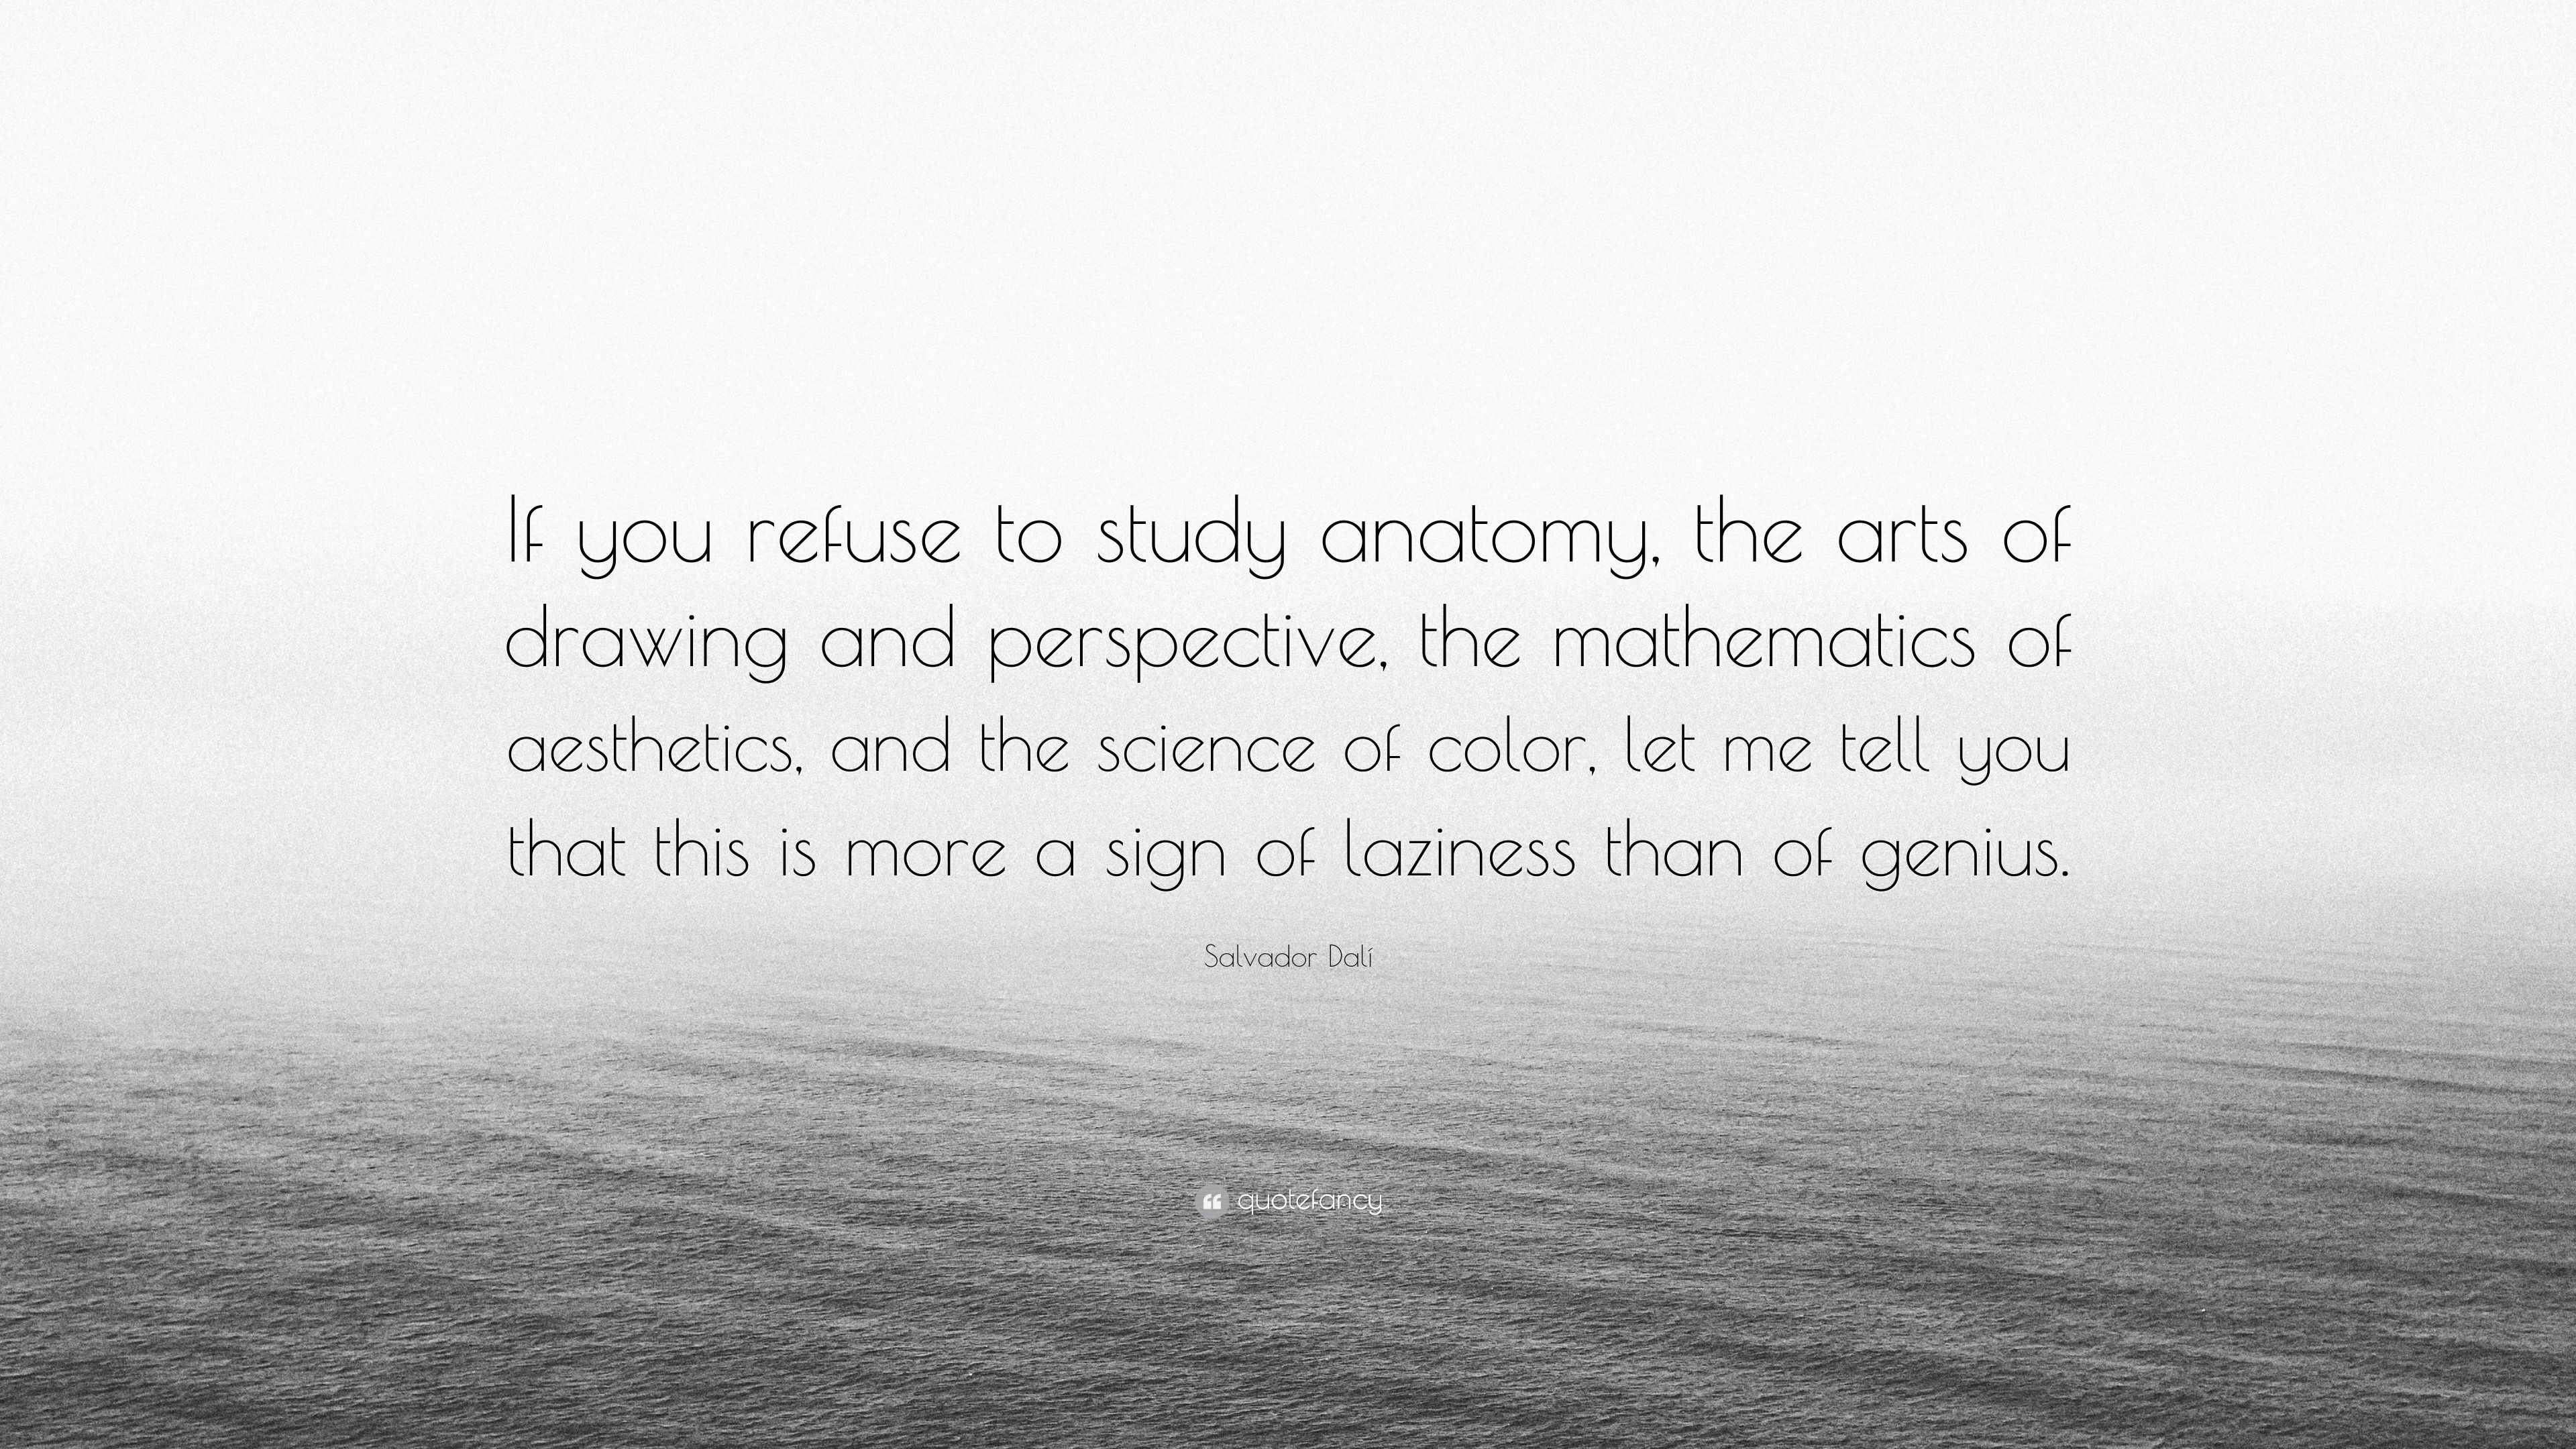 Salvador Dalí Quote: “If you refuse to study anatomy, the arts